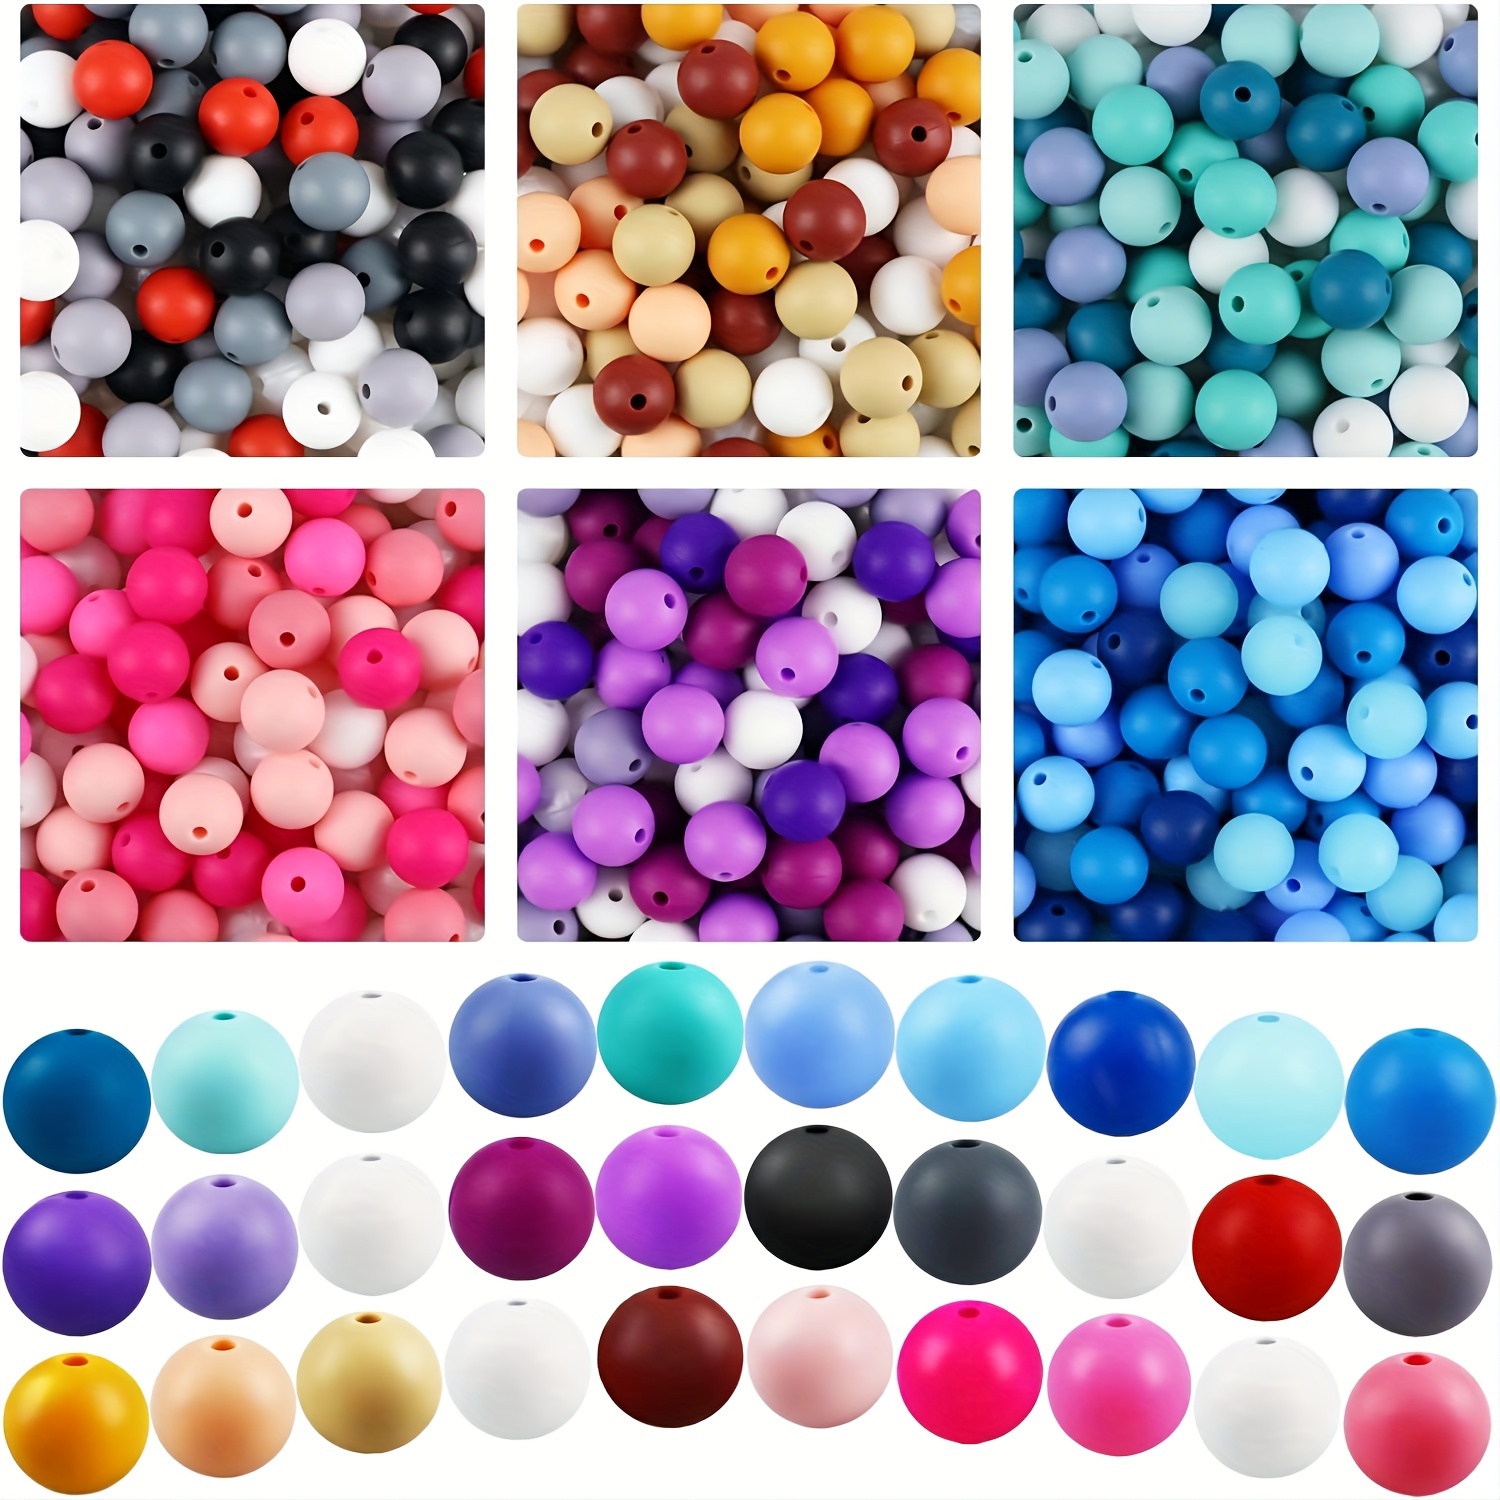 

120 Pcs Silicone Beads Set, 15mm Multi-color Craft Beads Combination For Diy Projects, Home Decors, Assorted Colorful Round Silicone Beads With Hole For Jewelry Making